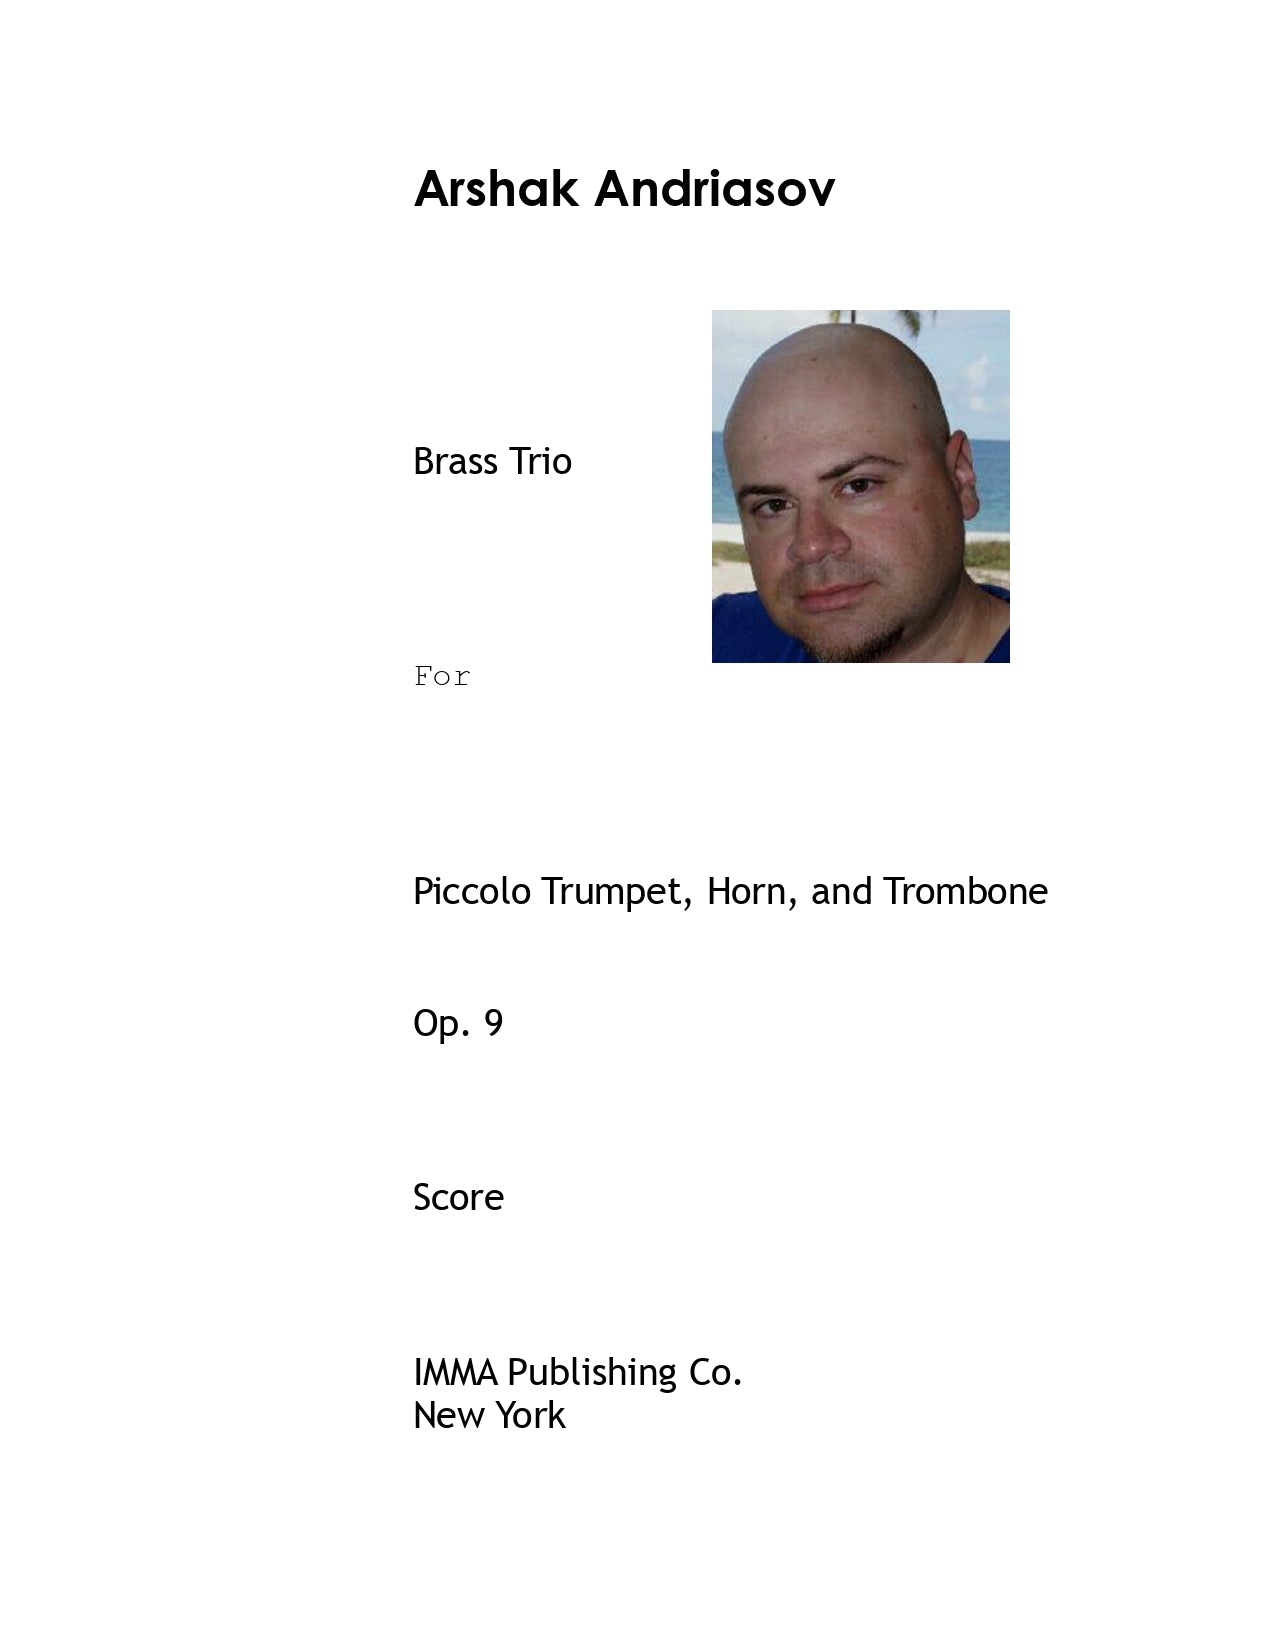 100. Arshak Andriasov: Brass Trio, Op. 9 for Piccolo Trumpet, Horn, and Trombone (PDF)